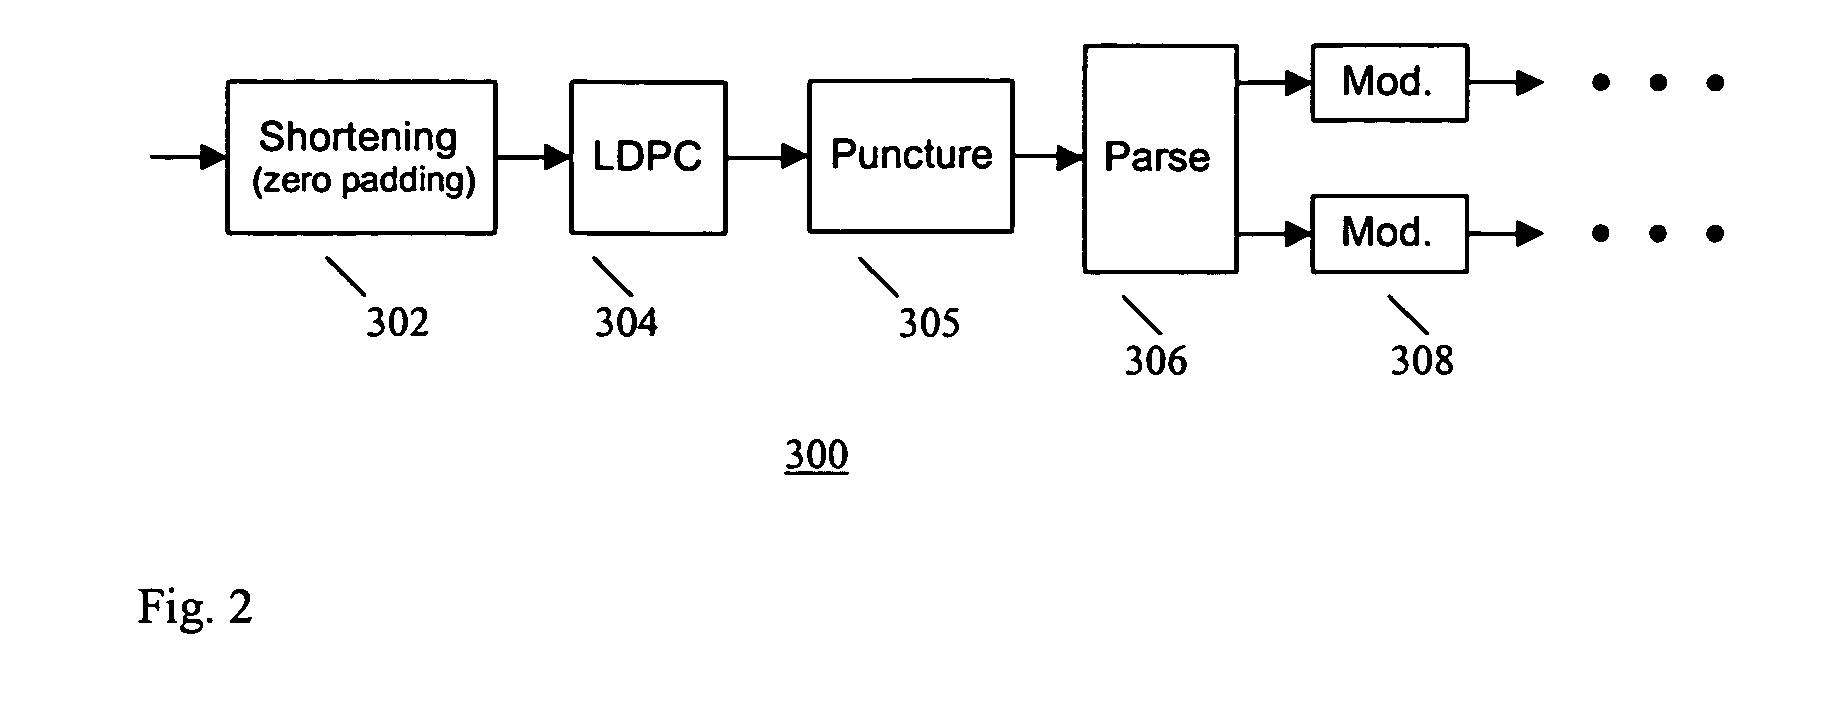 LDPC concatenation rules for IEEE 802.11n systems